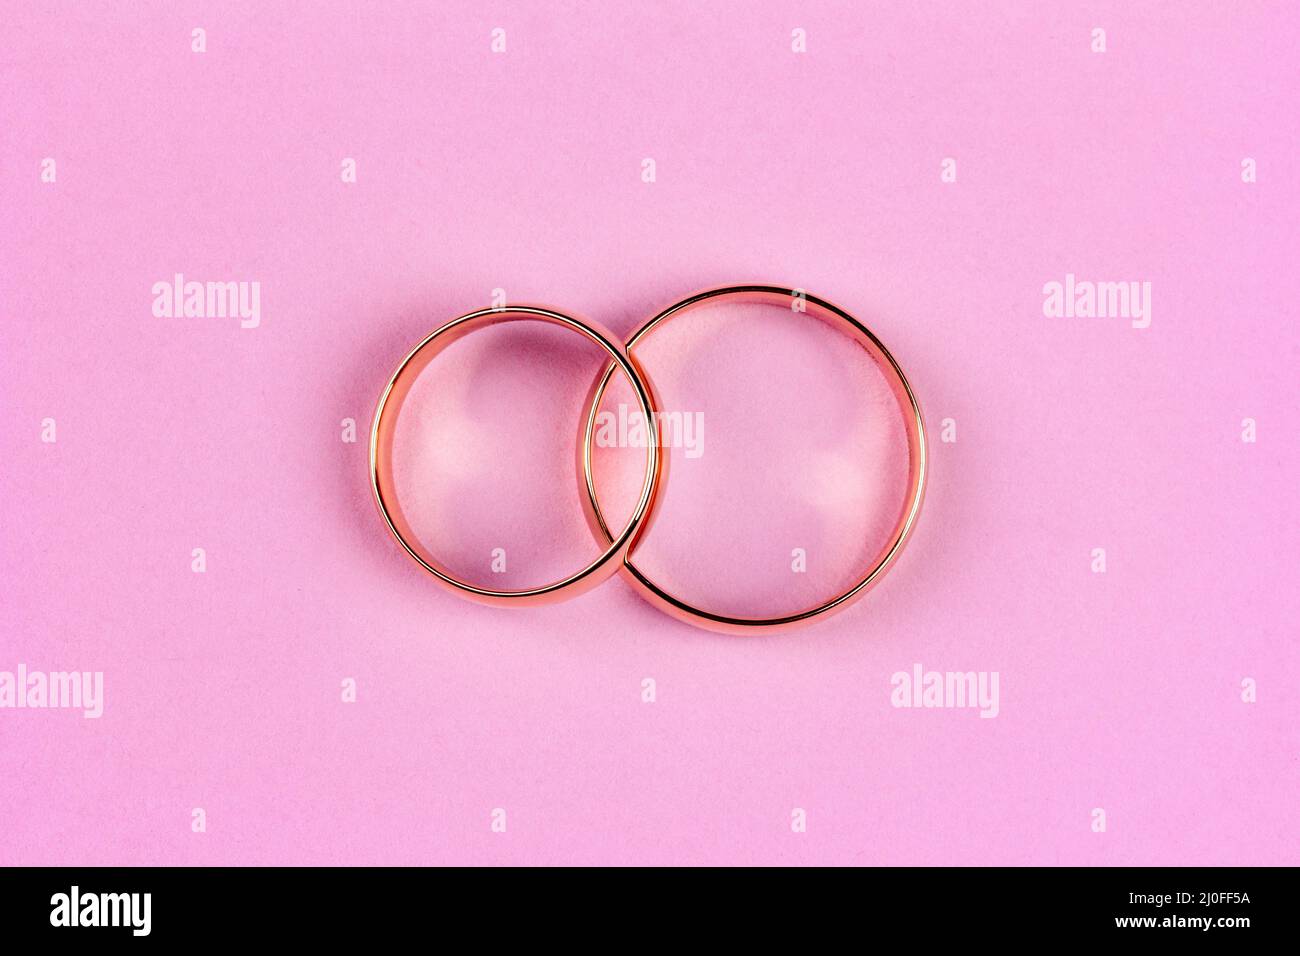 A pair of gold wedding rings on a pink background, top view flat lay Stock Photo